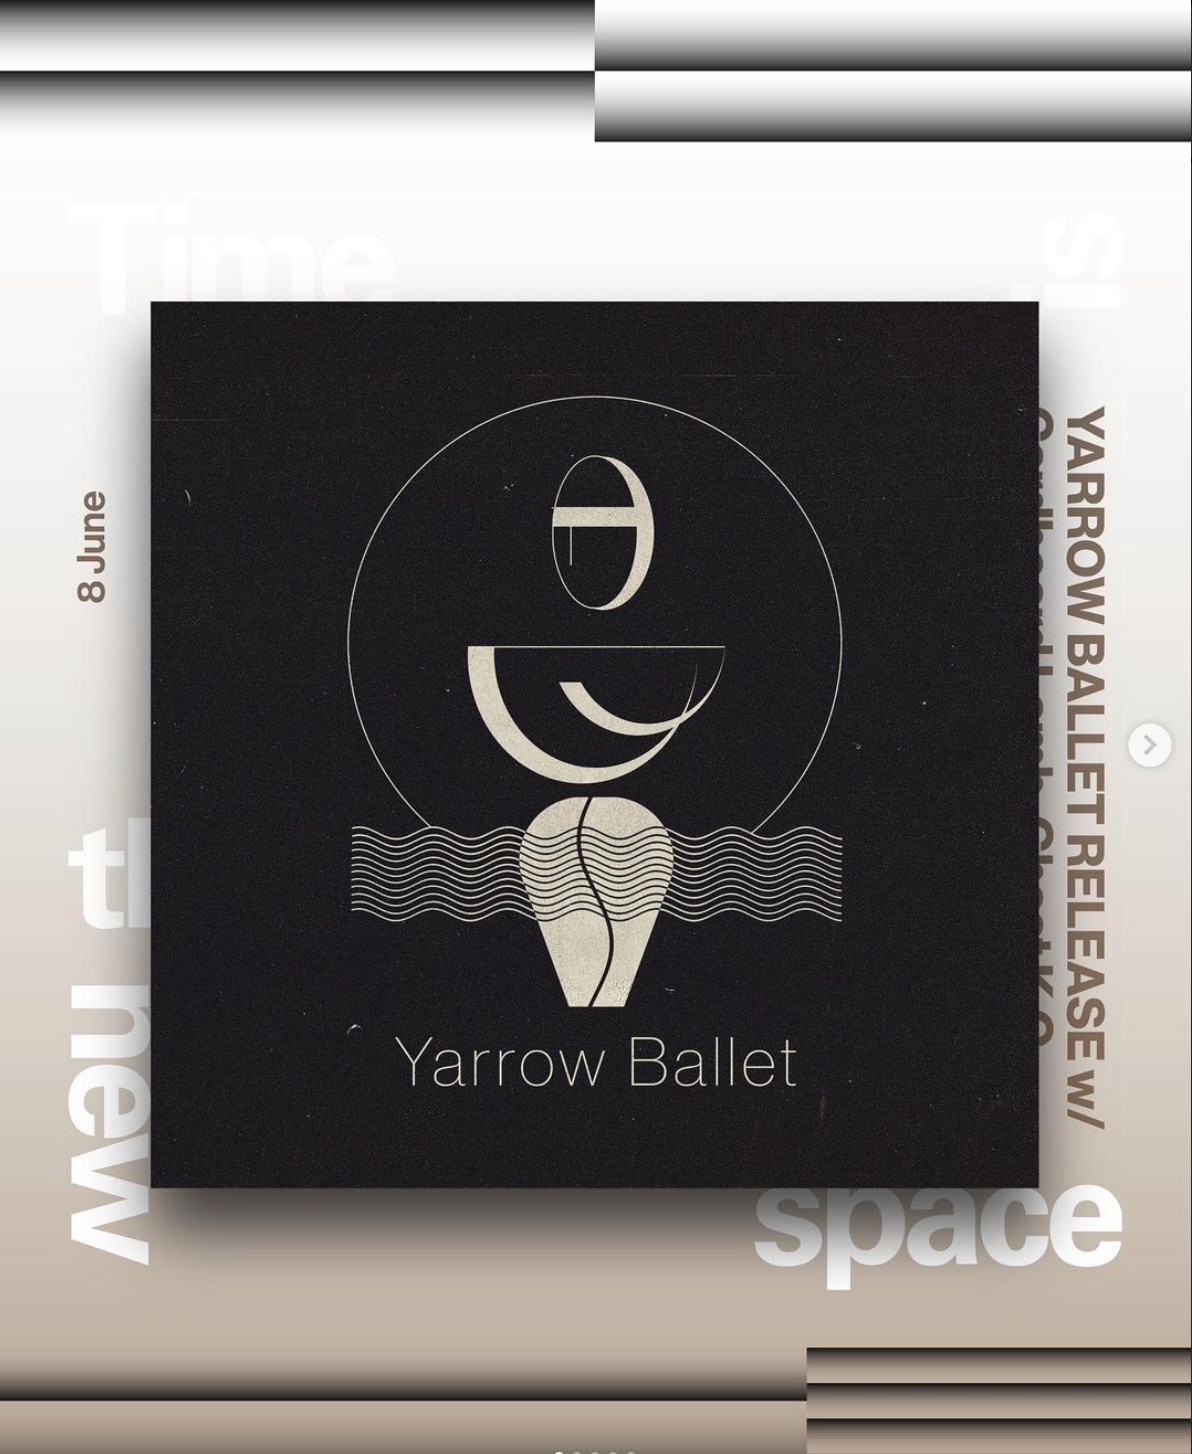 Yarrow Ballet Release Party - フライヤー表